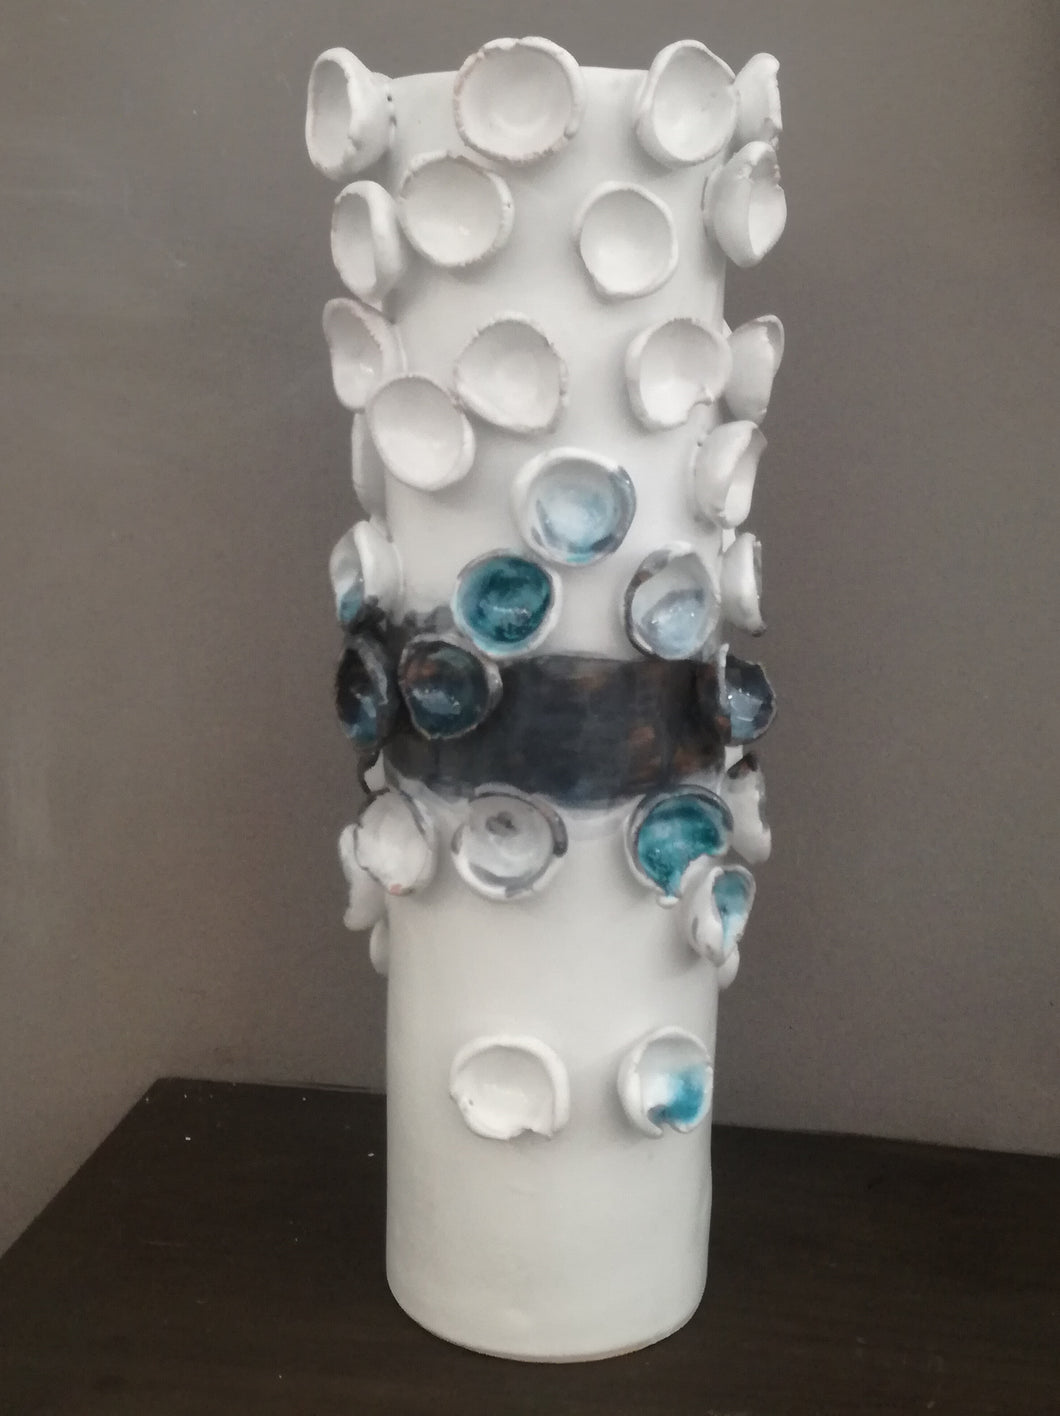 Vaso con inserti floreali / Cylindrical vase with floral inserts (one shot)